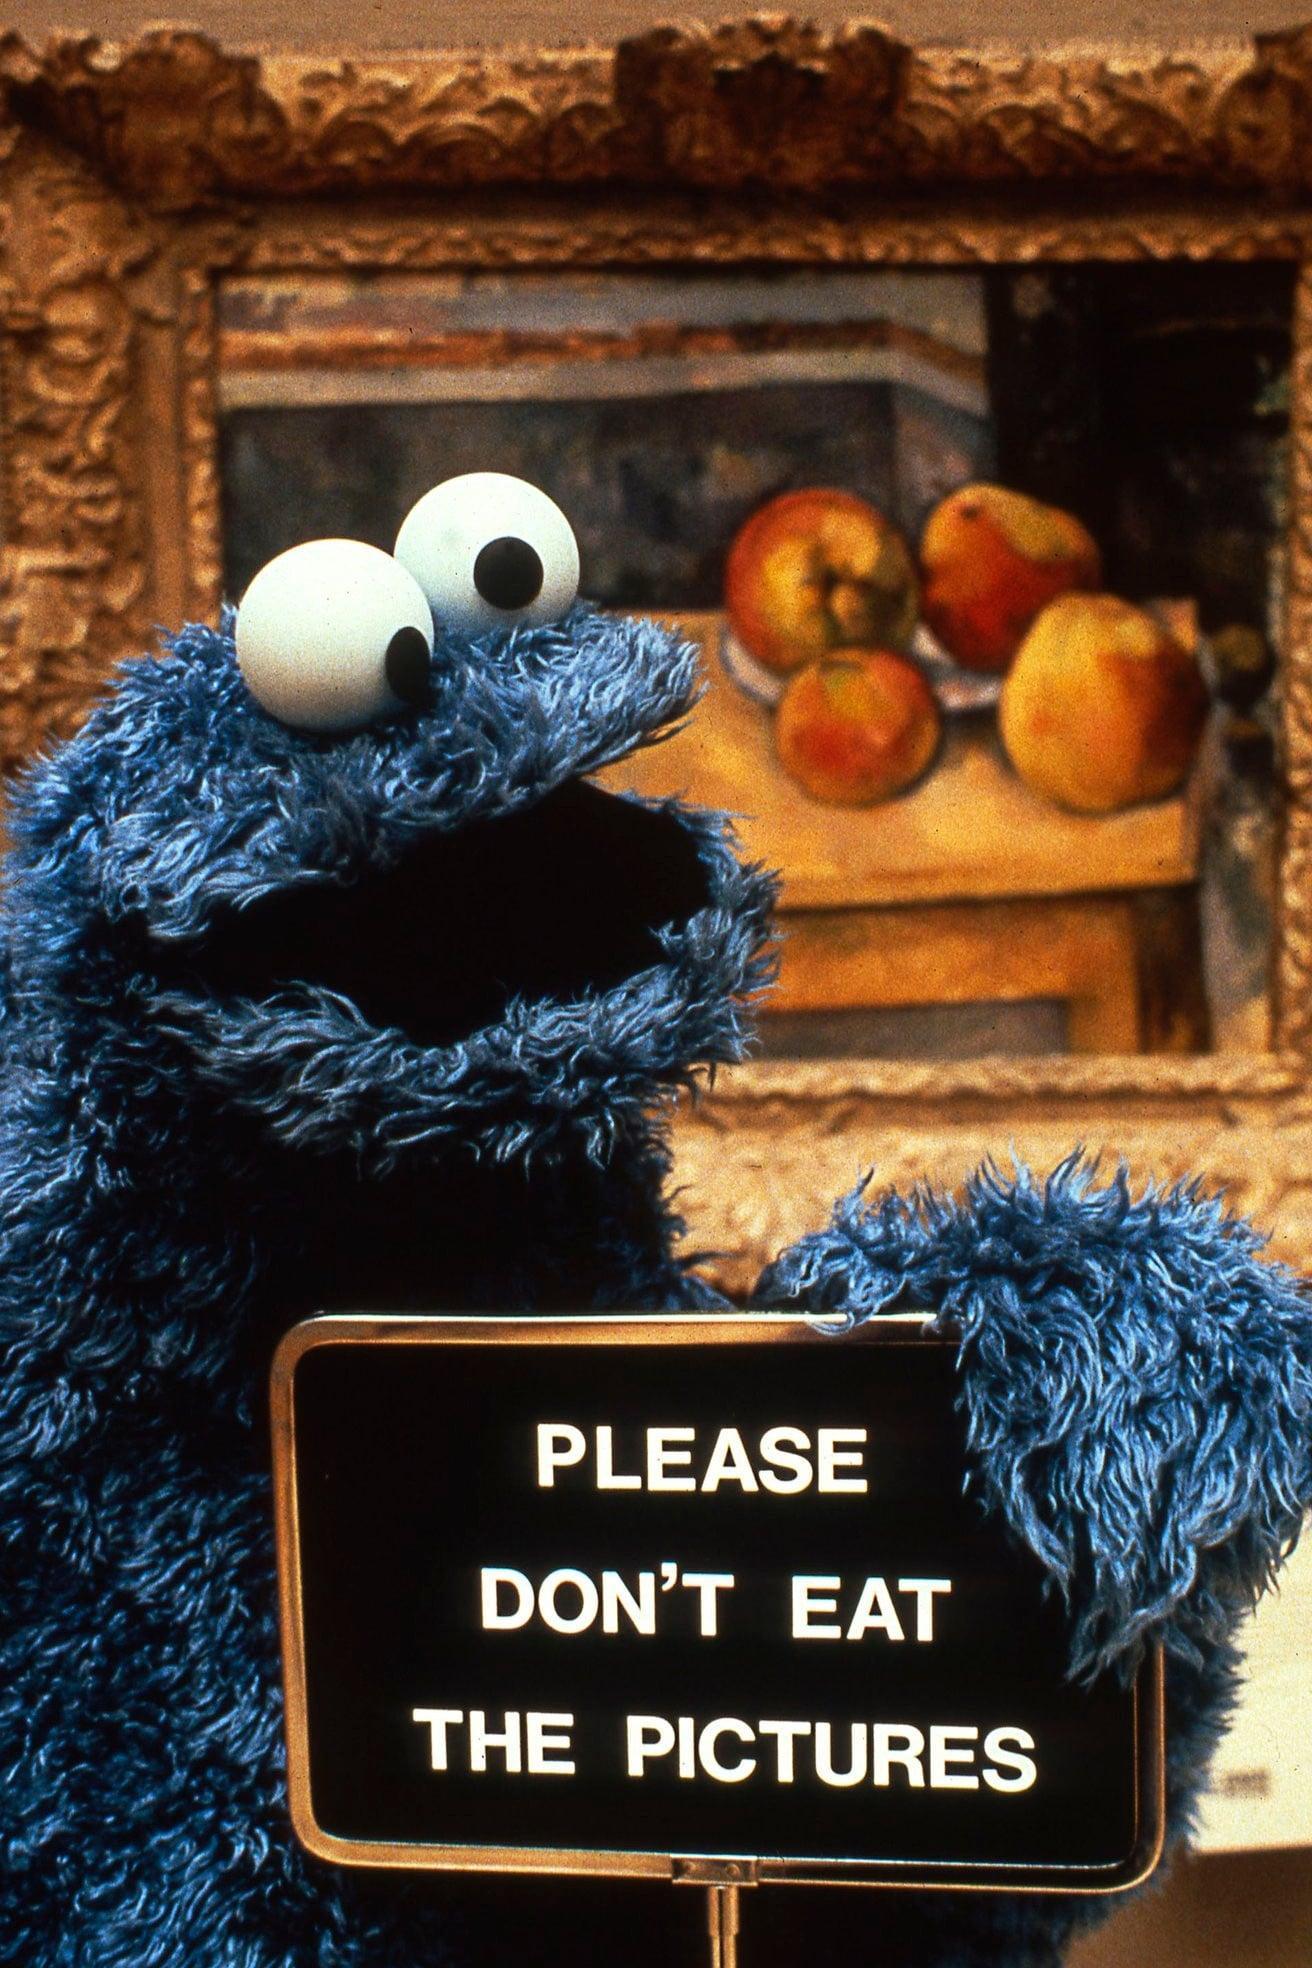 Don't Eat the Pictures: Sesame Street at the Metropolitan Museum of Art poster